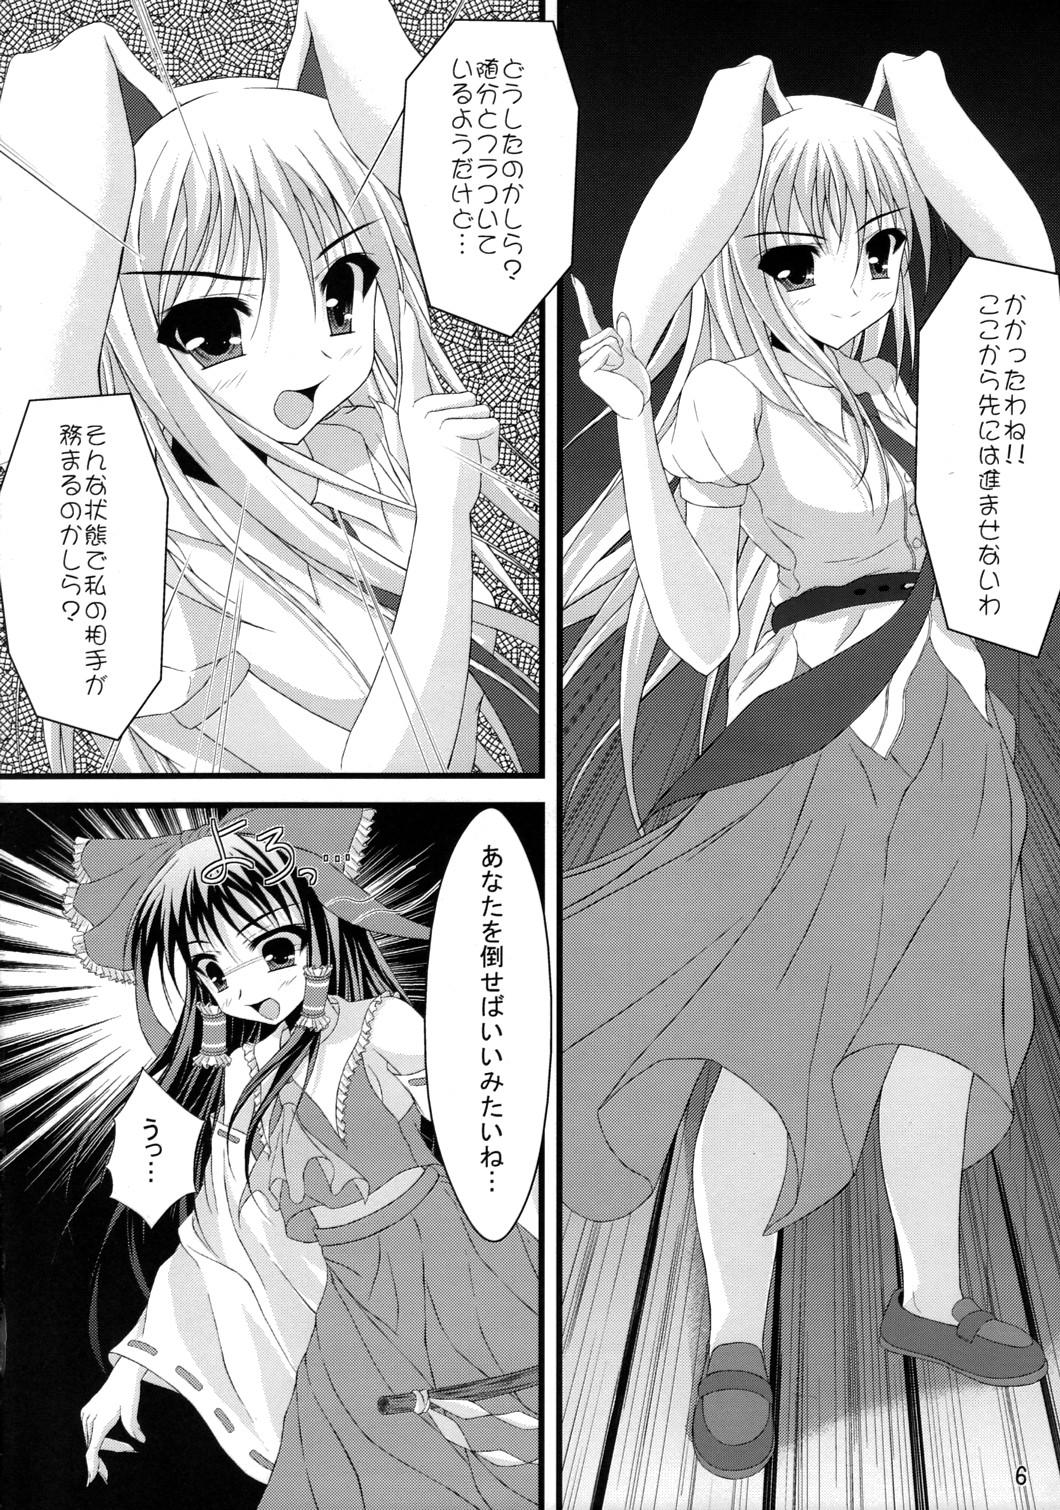 Kissing Tele-Mesmerism - Touhou project Transexual - Page 5